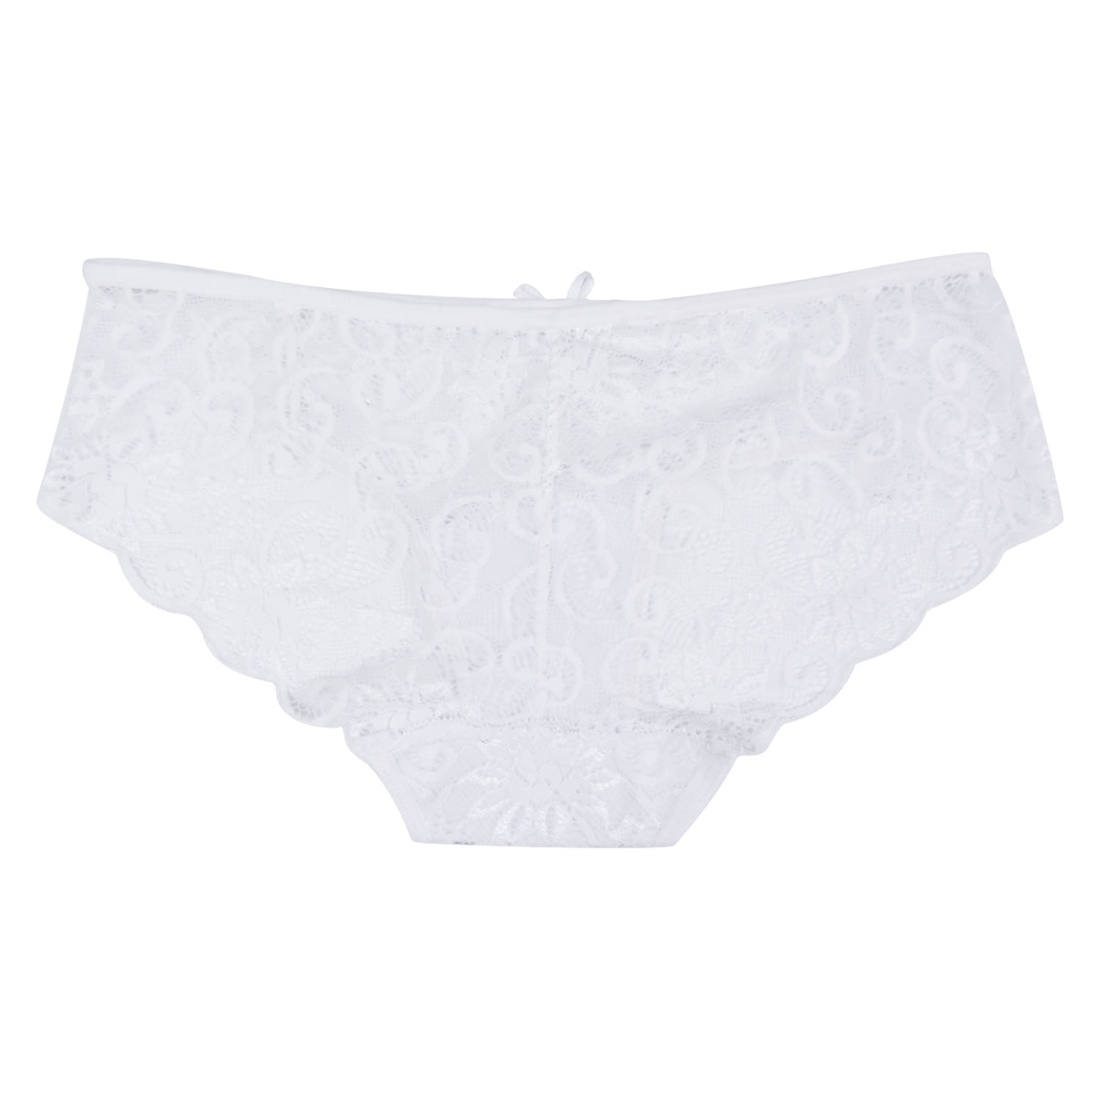 Lyacmy Sexy Lace Underwear for Women, Invisible Seamless Cotton Panties ...